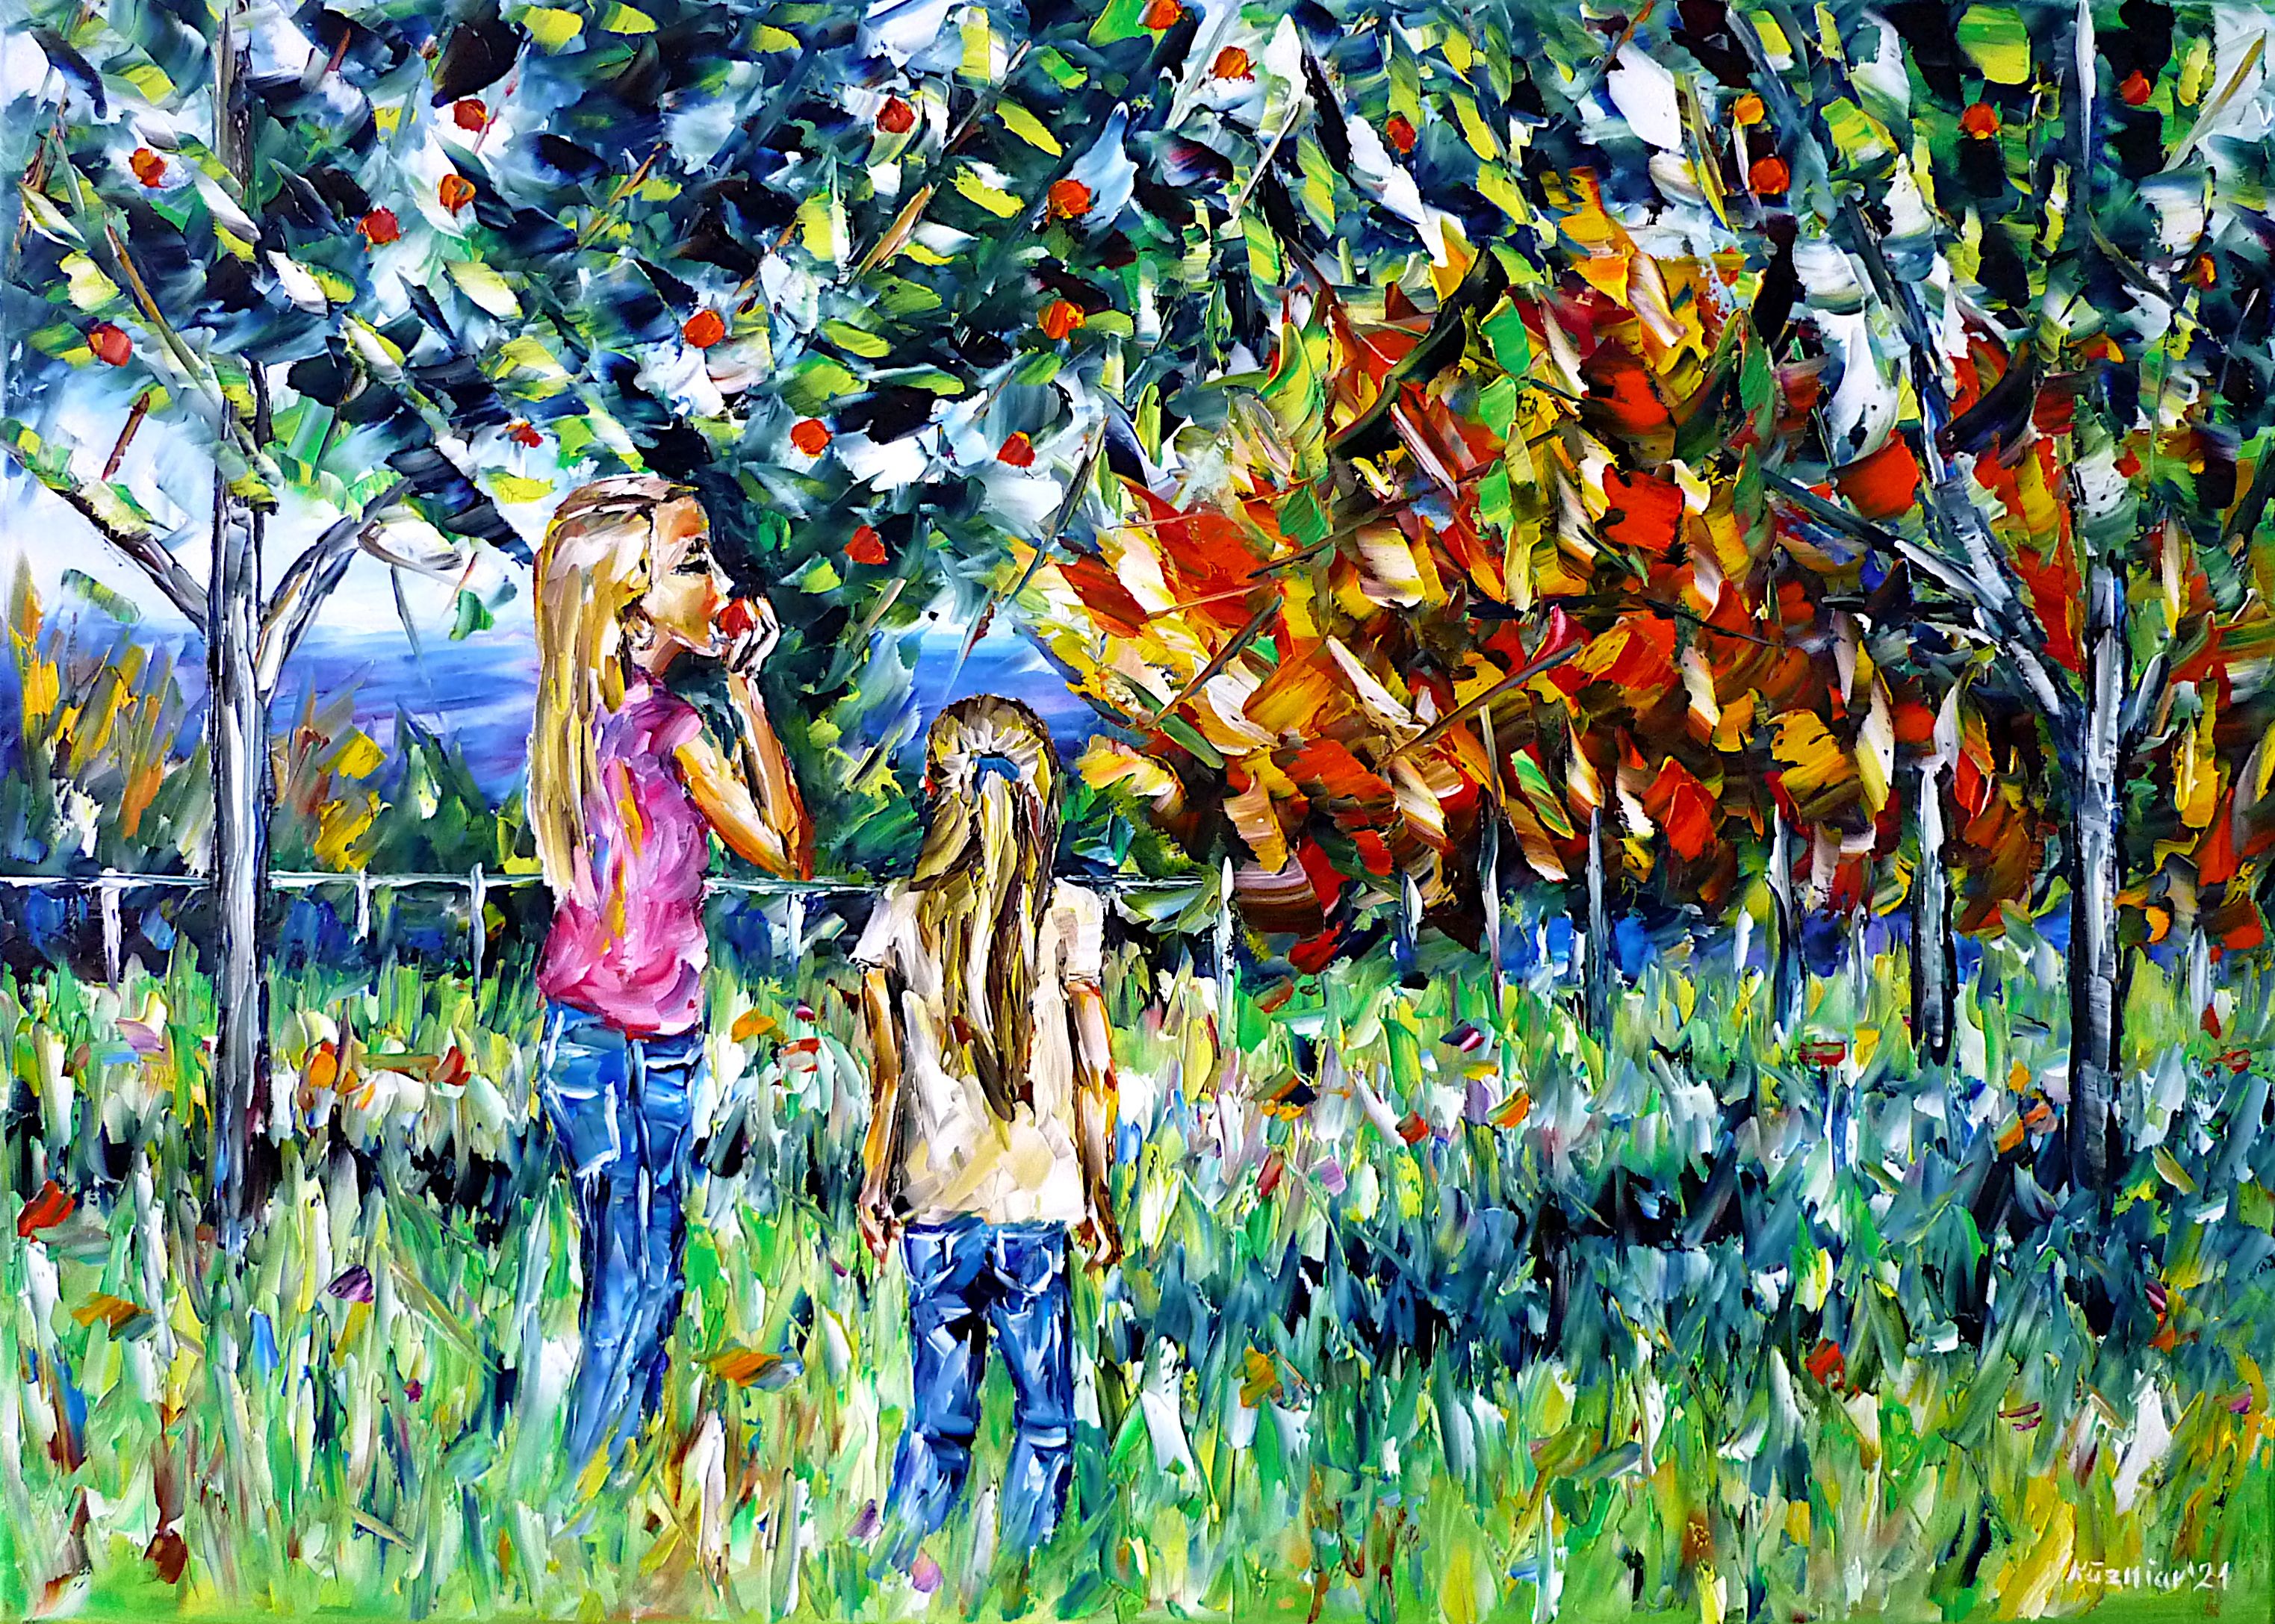 children in the garden,children in the orchard,young girls in the garden,joy of children,children’s life,happy life,children in nature,garden landscape,children’s painting,blonde children,young blonde girls,child with apple,child with fruit,garden picture,garden painting,green garden,apple trees,happy children,healthy children,children's picture,children in the countryside,two sisters,happy times,happiness,siblings,joy,friendly picture,friendly painting,peace,peaceful picture,peaceful painting,palette knife oil painting,modernart,impressionism,expressionism,figurative,abstract painting,lively colours,colorful painting,bright colors,light reflections,impasto painting,living room art,living room picture,living room painting